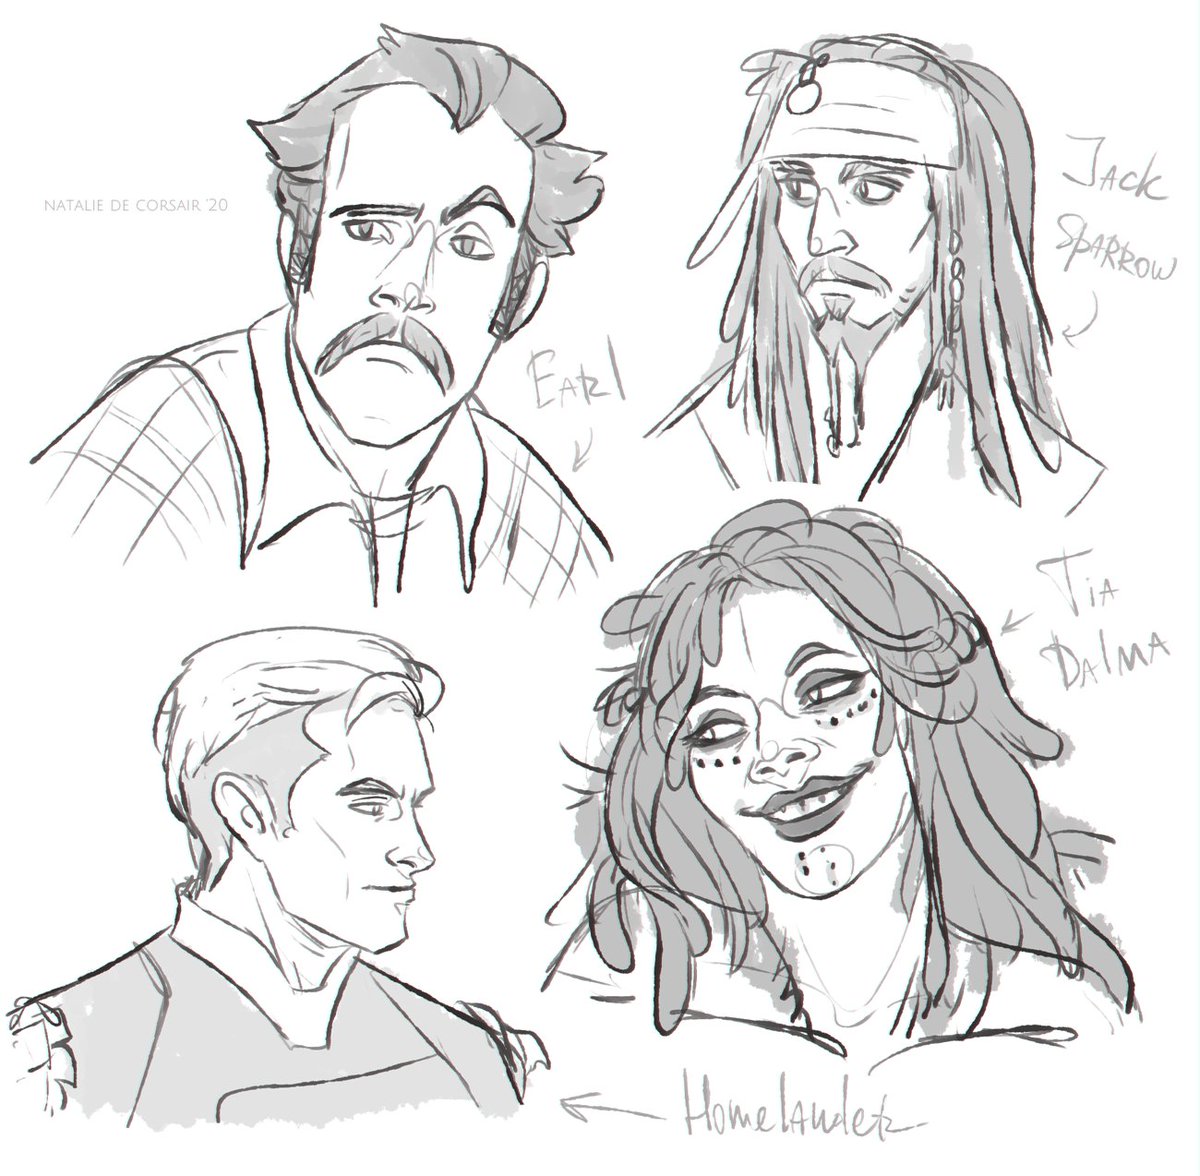 I felt really drained today and wanted to hide in the woods. But I decided to practice some faces instead and drew THEM.
I like all of them. Even #Homelander, though he makes me want to strangle him almost all the time 